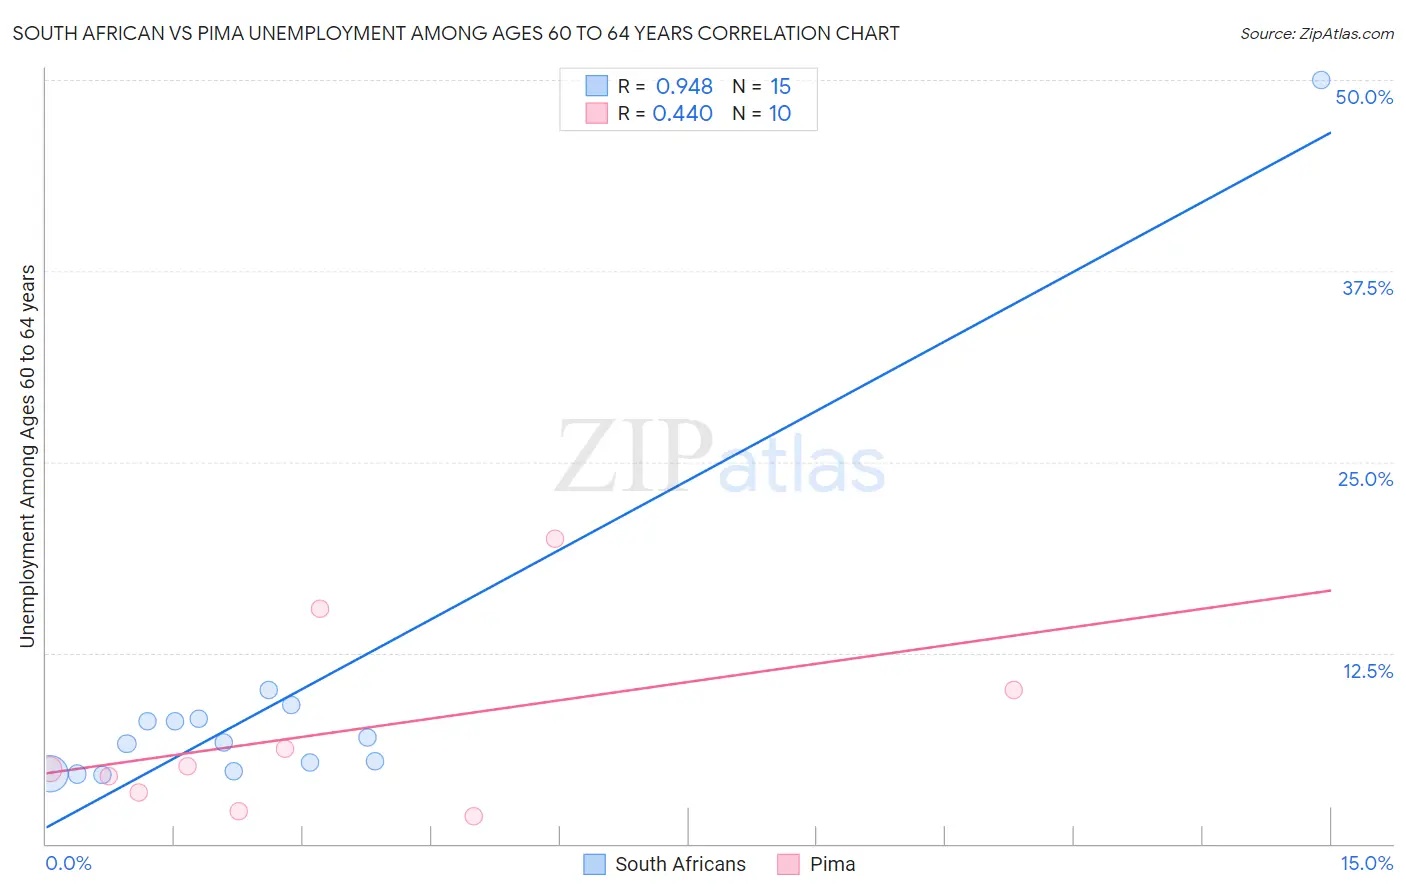 South African vs Pima Unemployment Among Ages 60 to 64 years